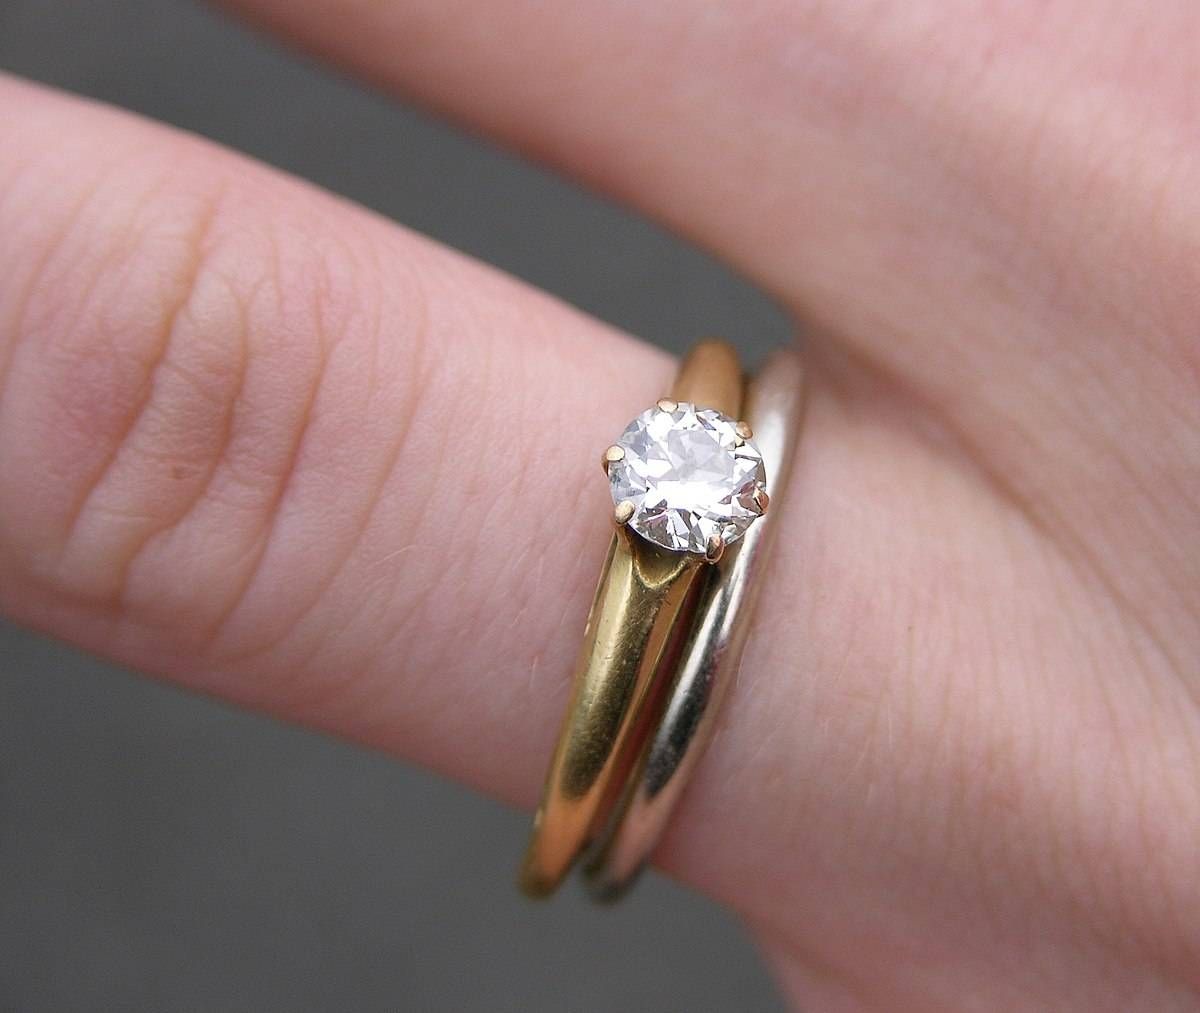 Engagement Ring – Wikipedia With Regard To Wedding Band And Engagement Rings (View 1 of 15)